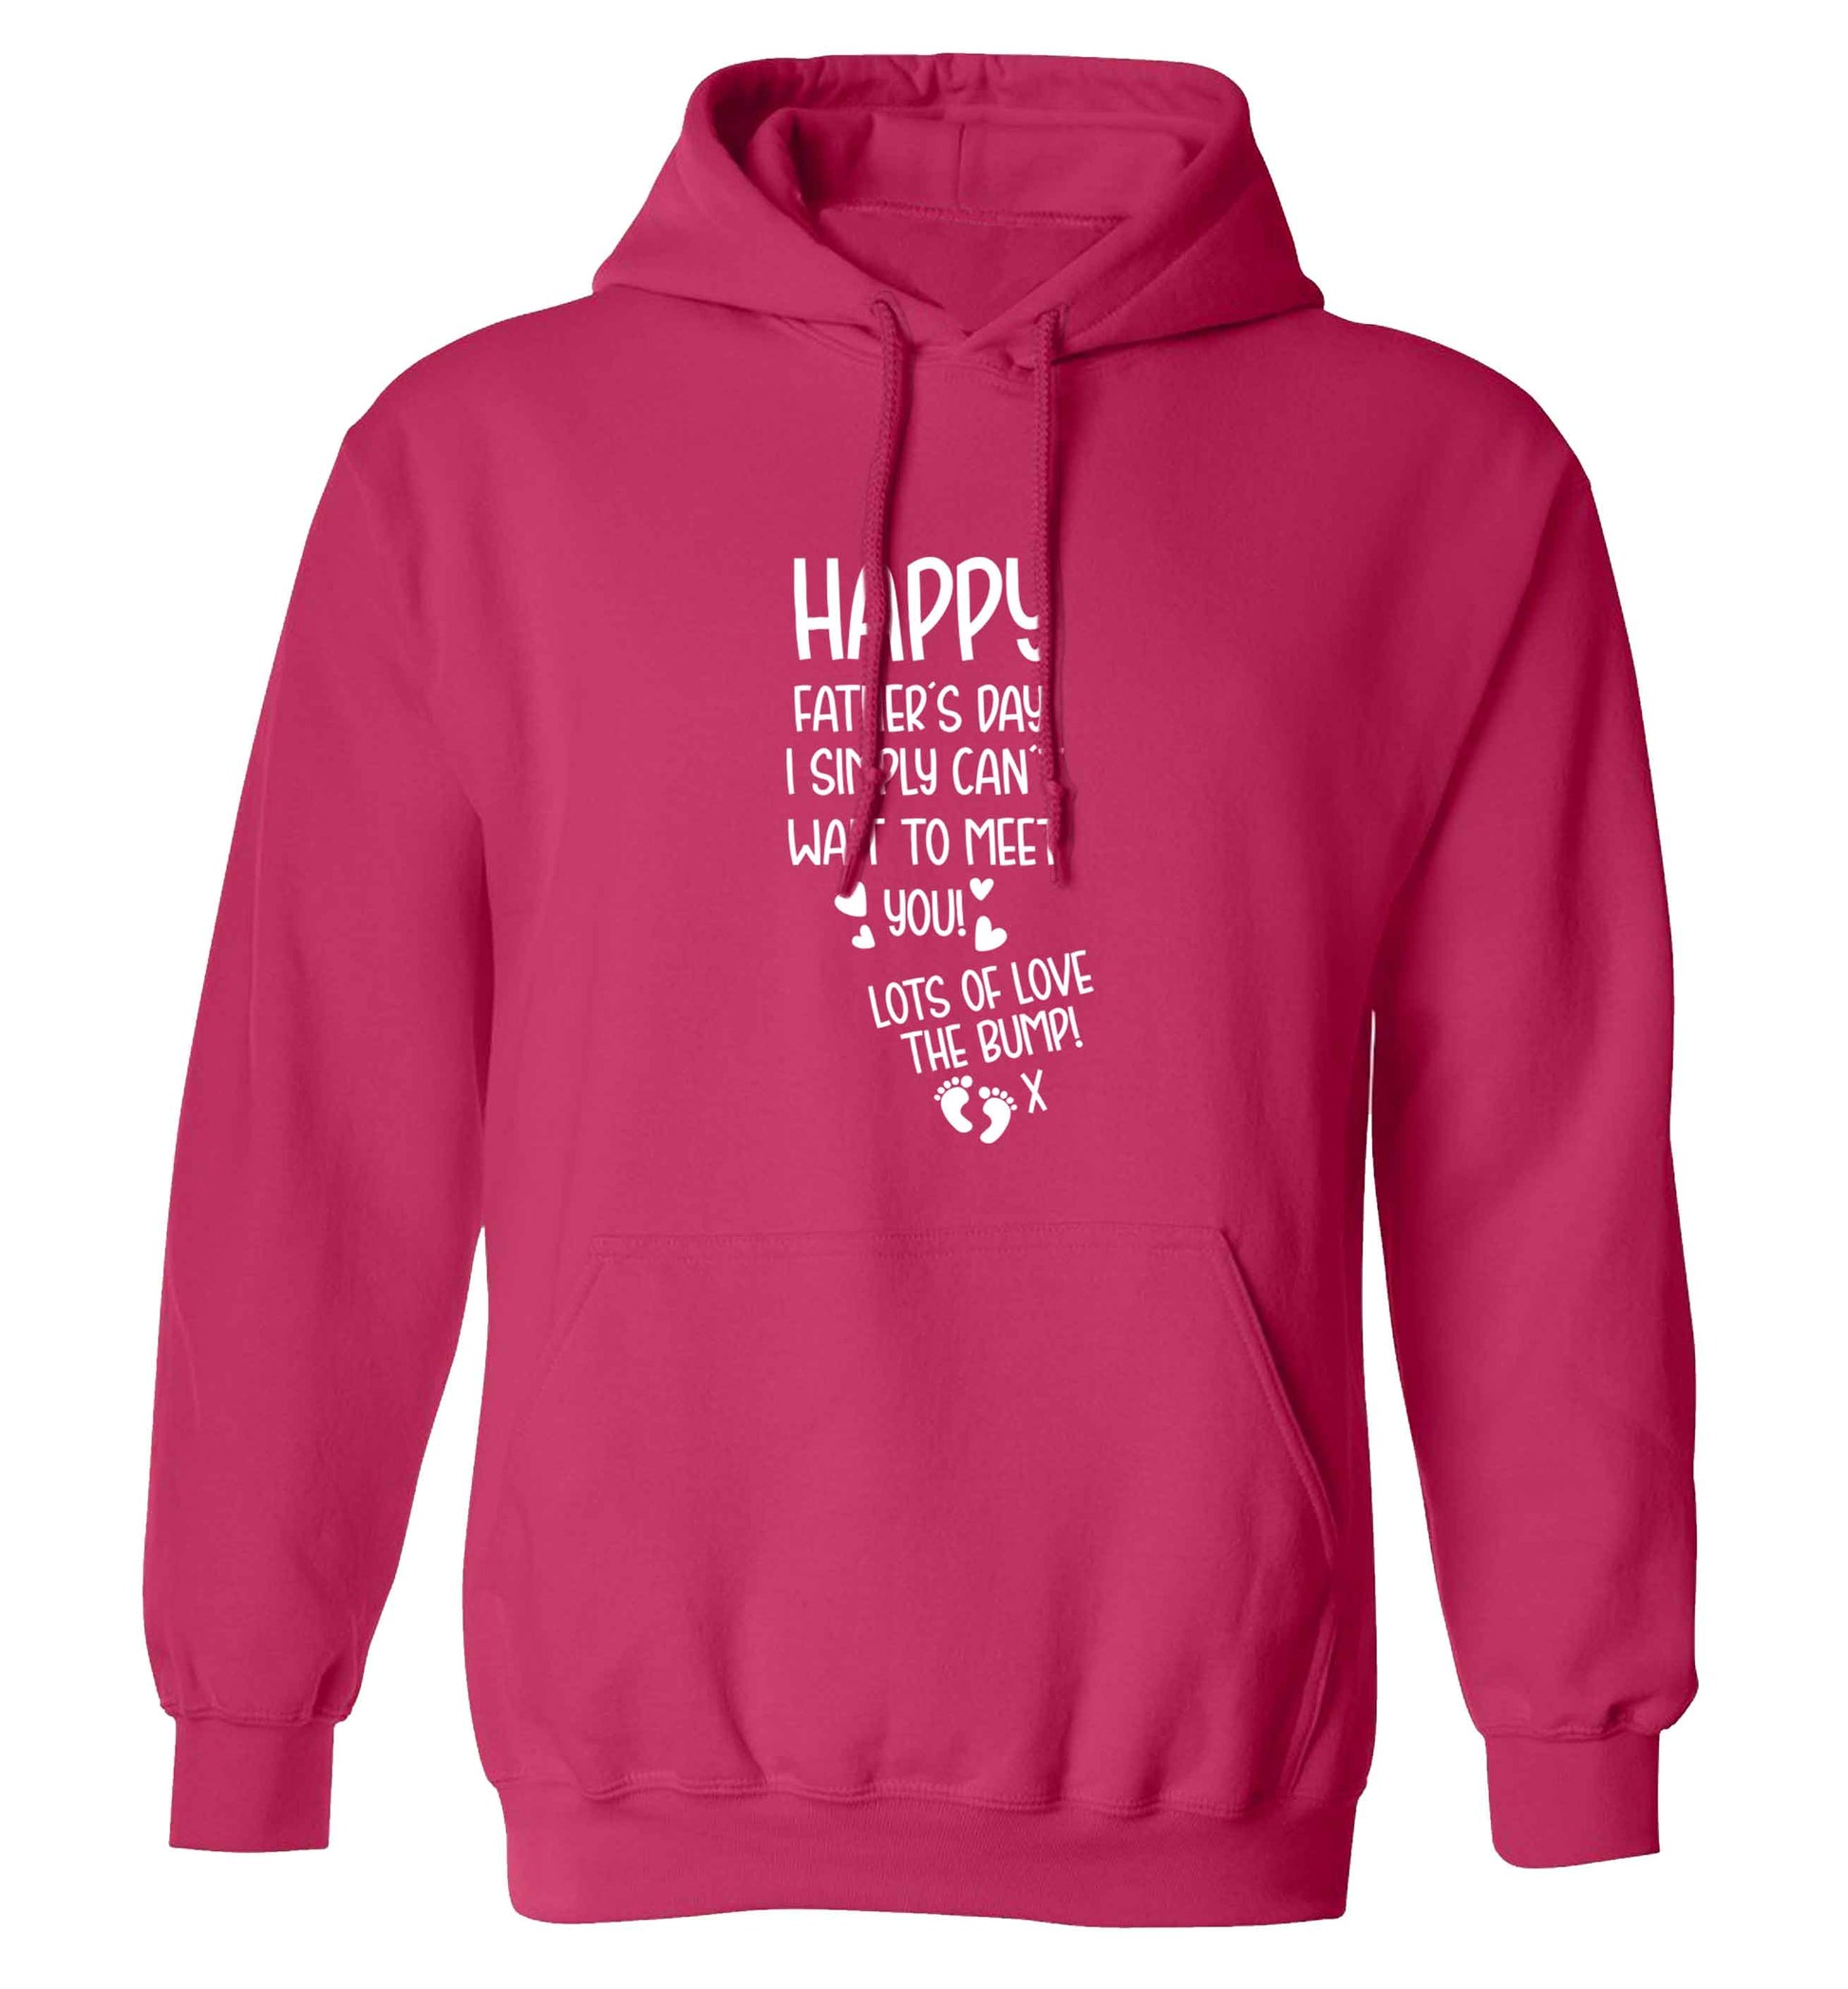 Happy Father's day daddy I can't wait to meet you lot's of love the bump! adults unisex pink hoodie 2XL